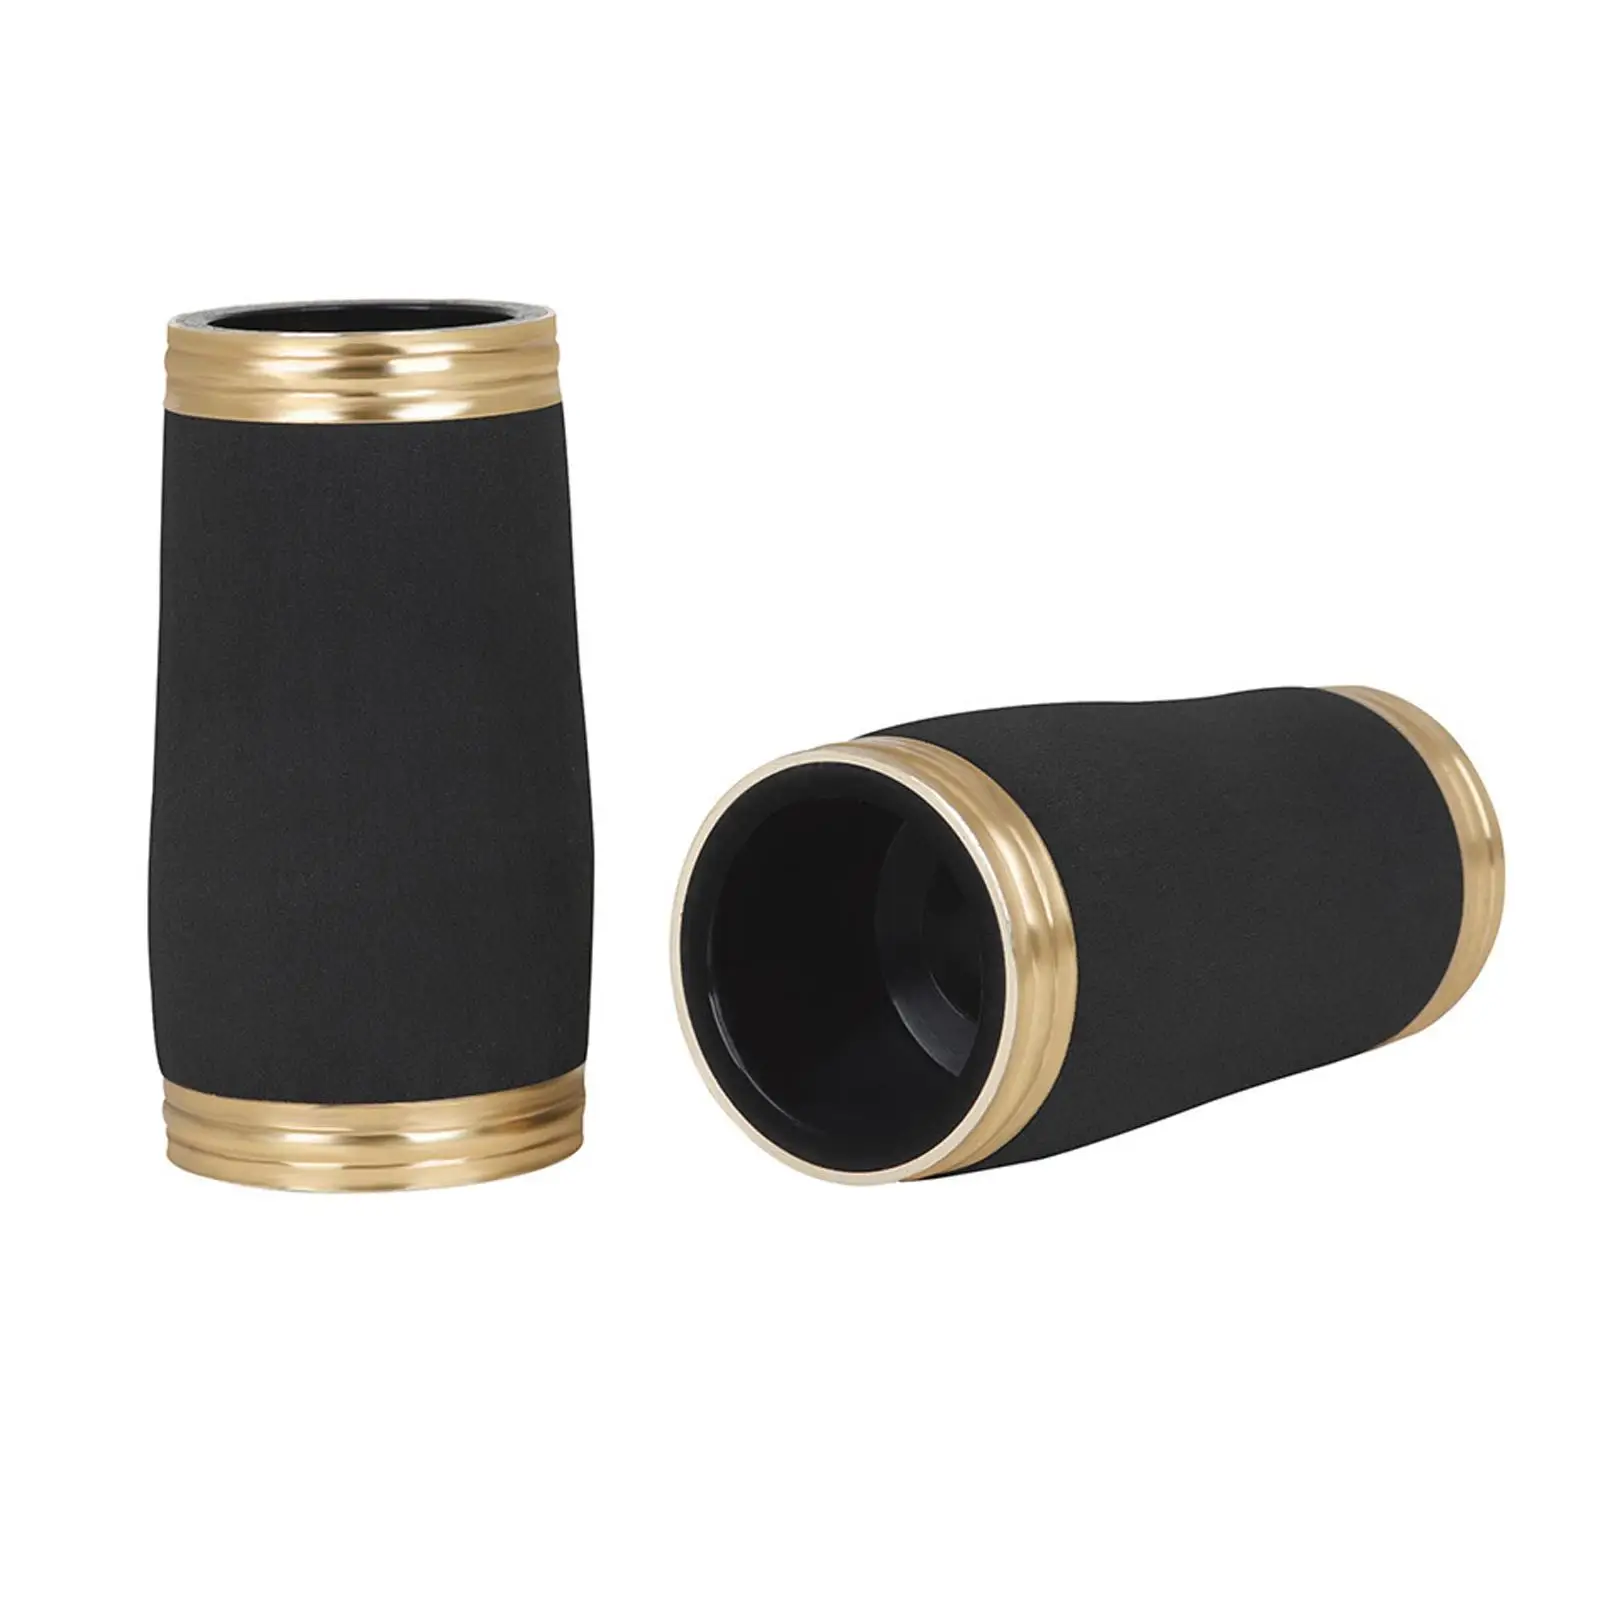 Clarinet Tube, Black Clarinet Barrel Replacement Tuning Tube, for Clarinet Accessory